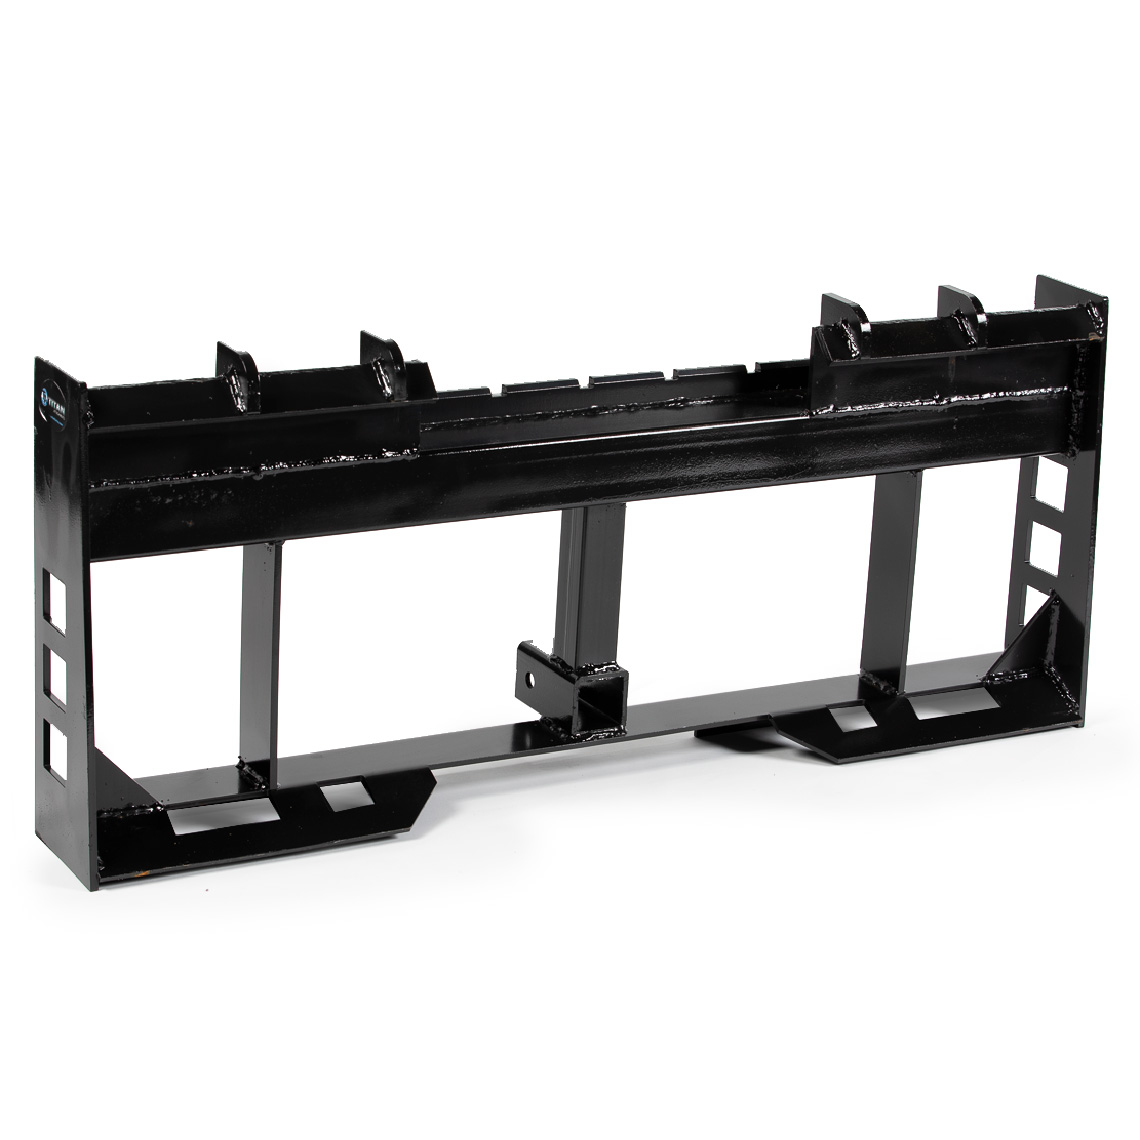 Titan Attachments Pallet Fork Frame With Trailer Hitch Bobcat Skid